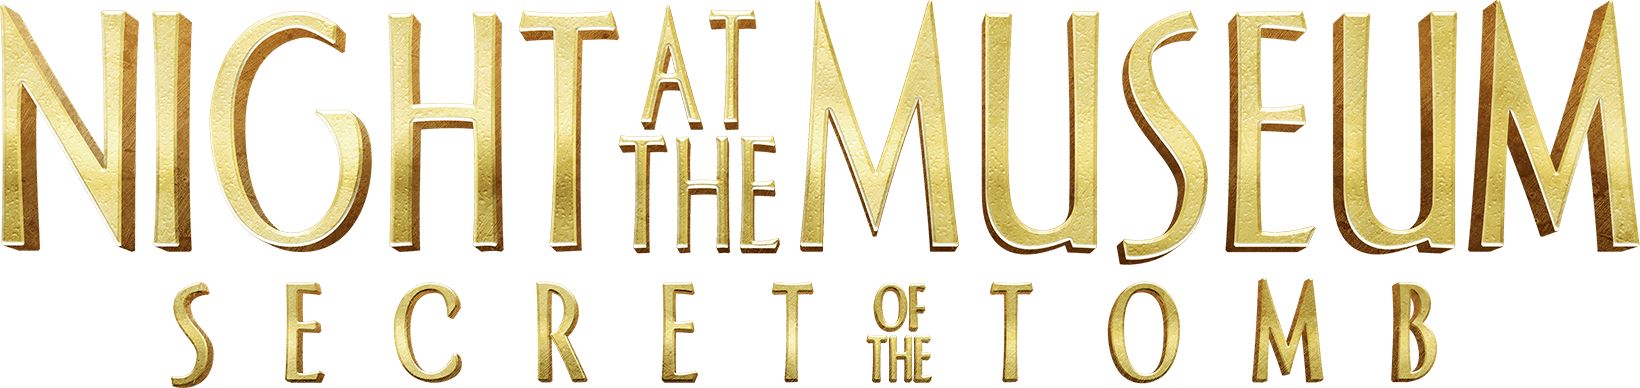 Night at the Museum: Secret of the Tomb logo